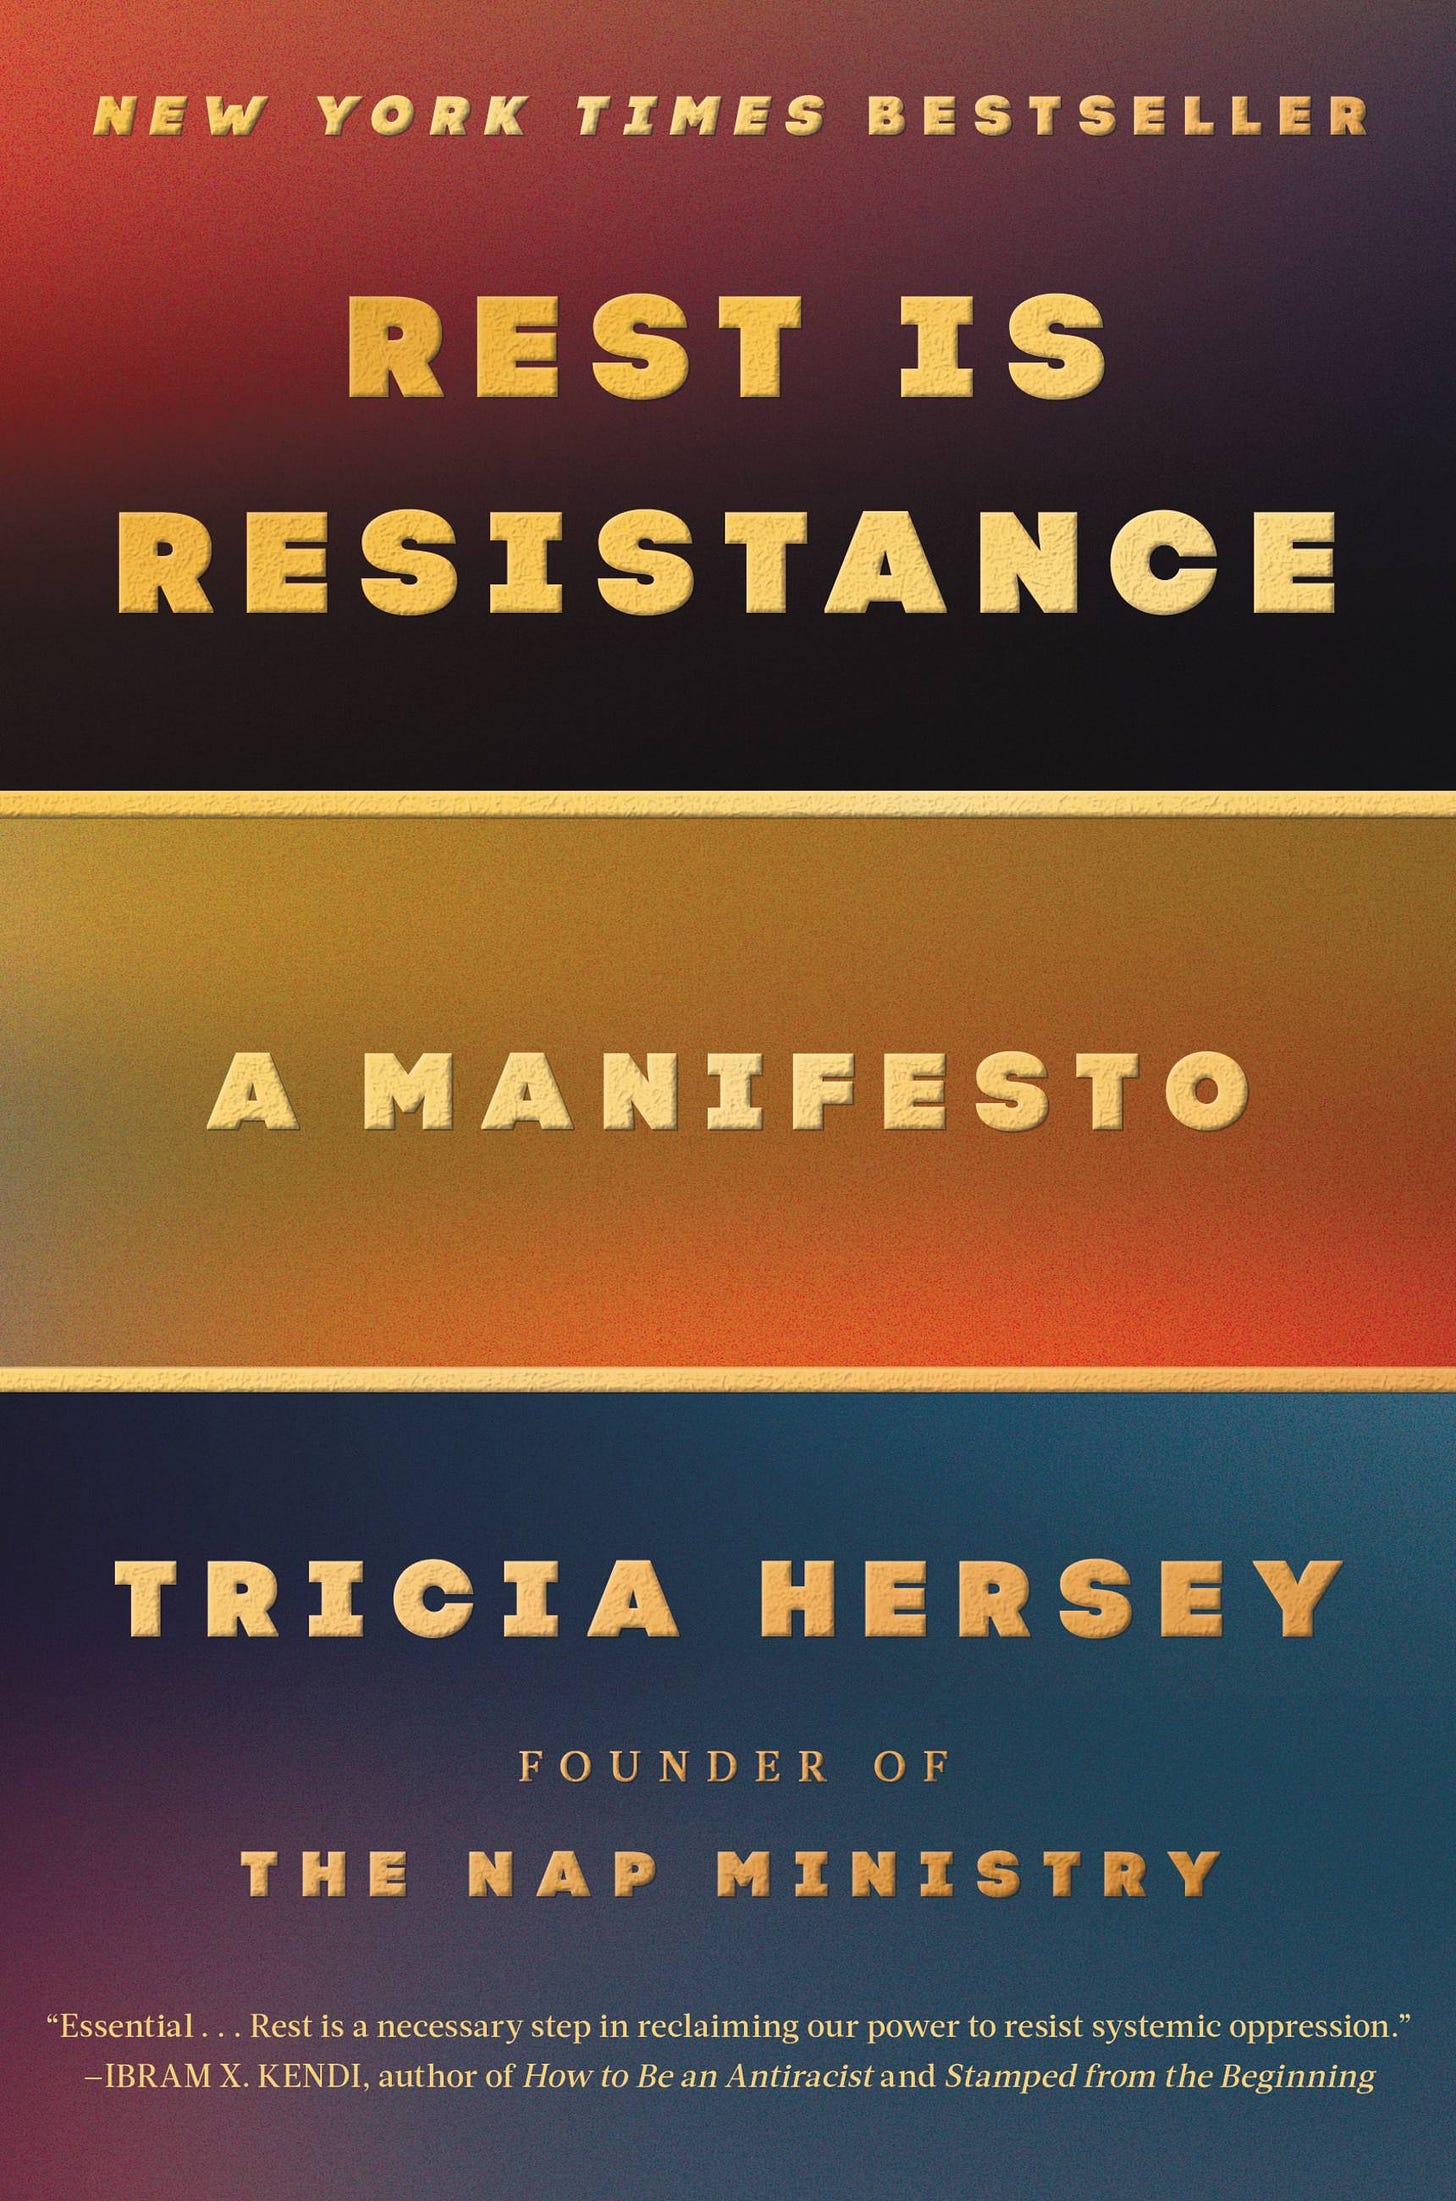 Rest Is Resistance by Tricia Hersey | Hachette Book Group